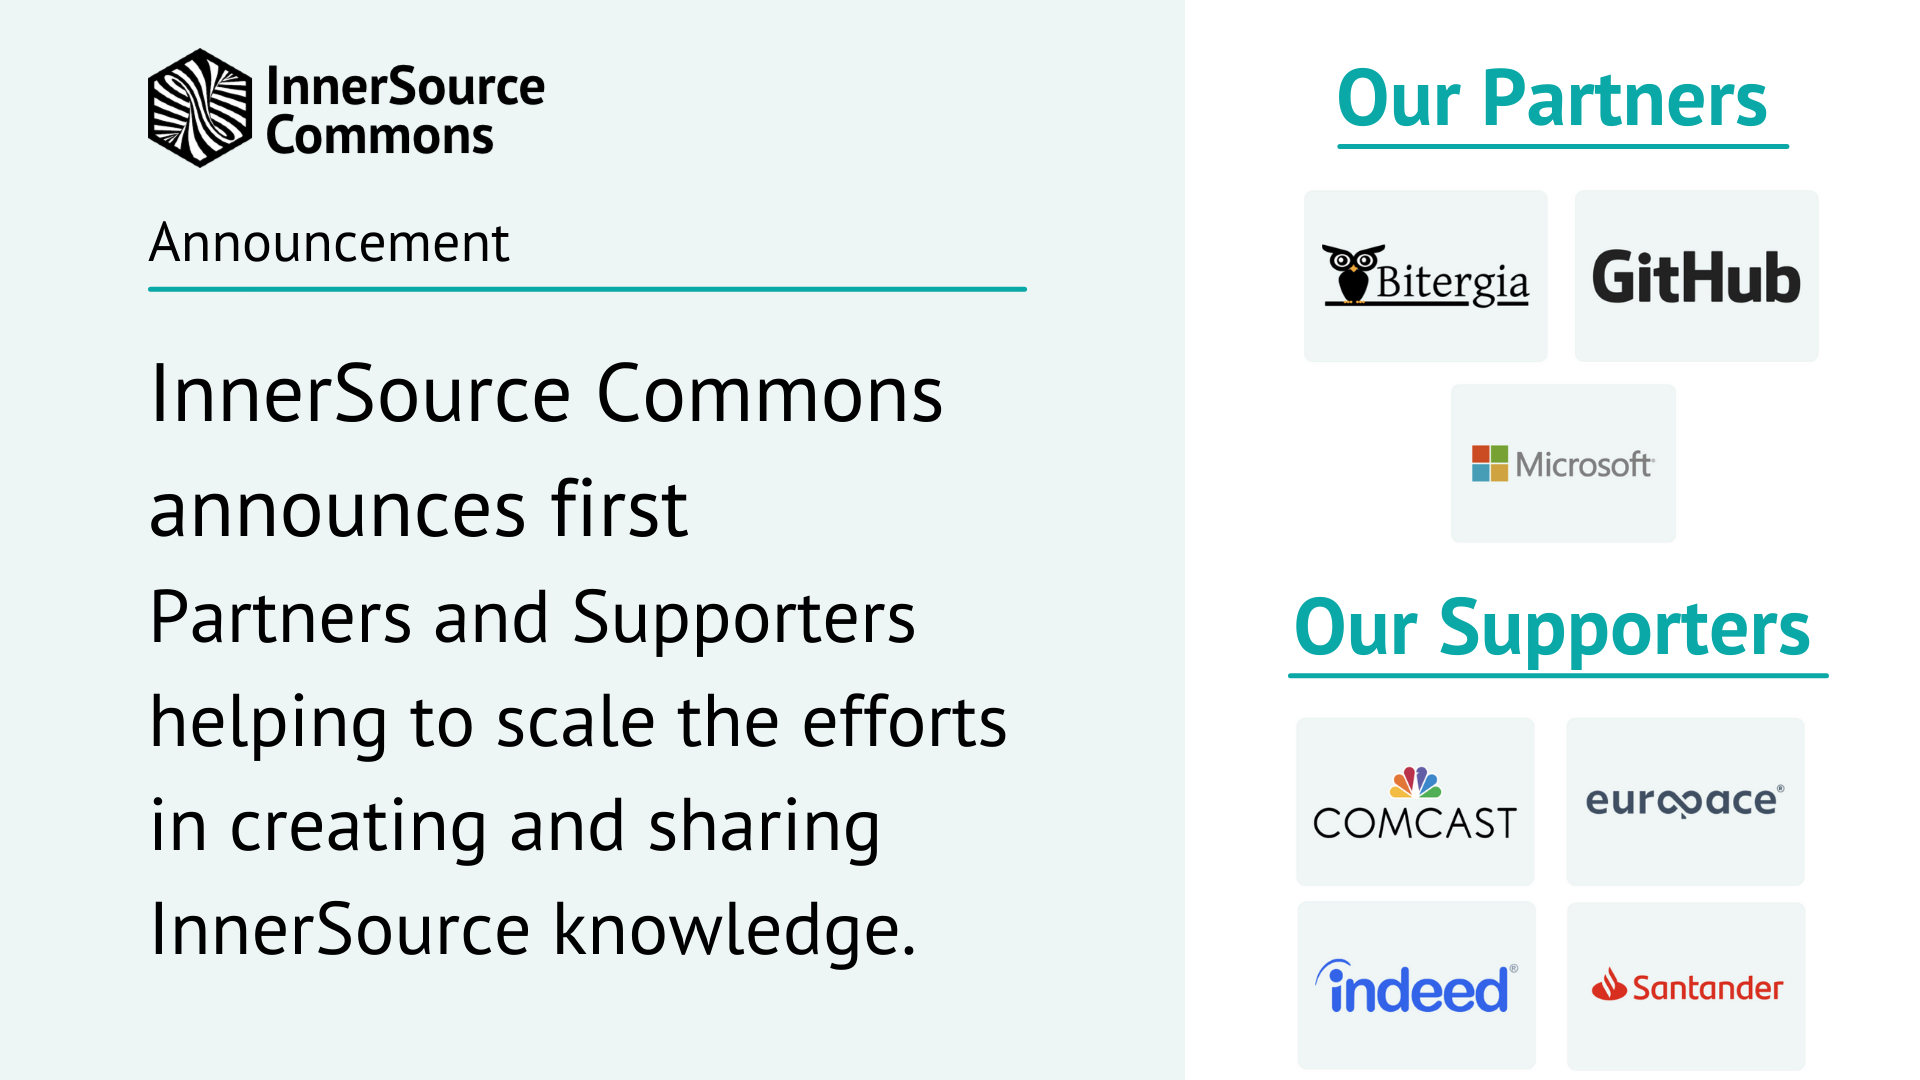 InnerSource Commons announces first Partners and Supporters helping to scale the efforts in creating and sharing InnerSource knowledge